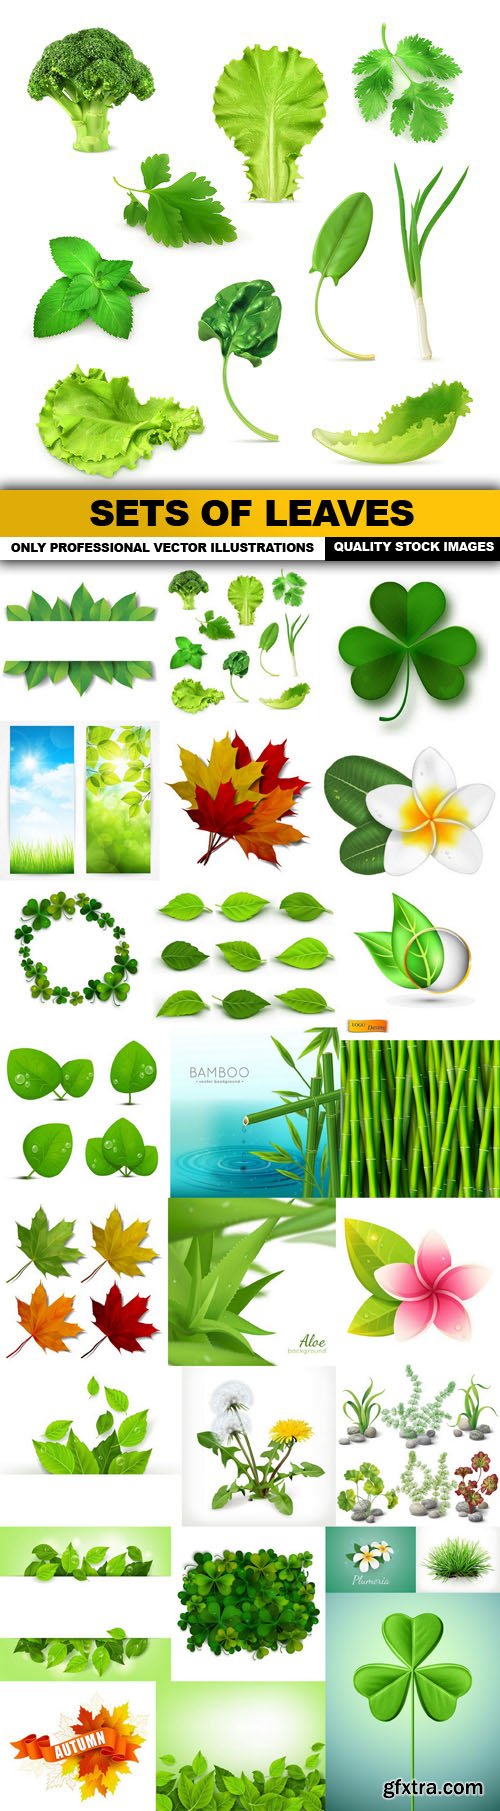 Sets Of Leaves - 25 Vector